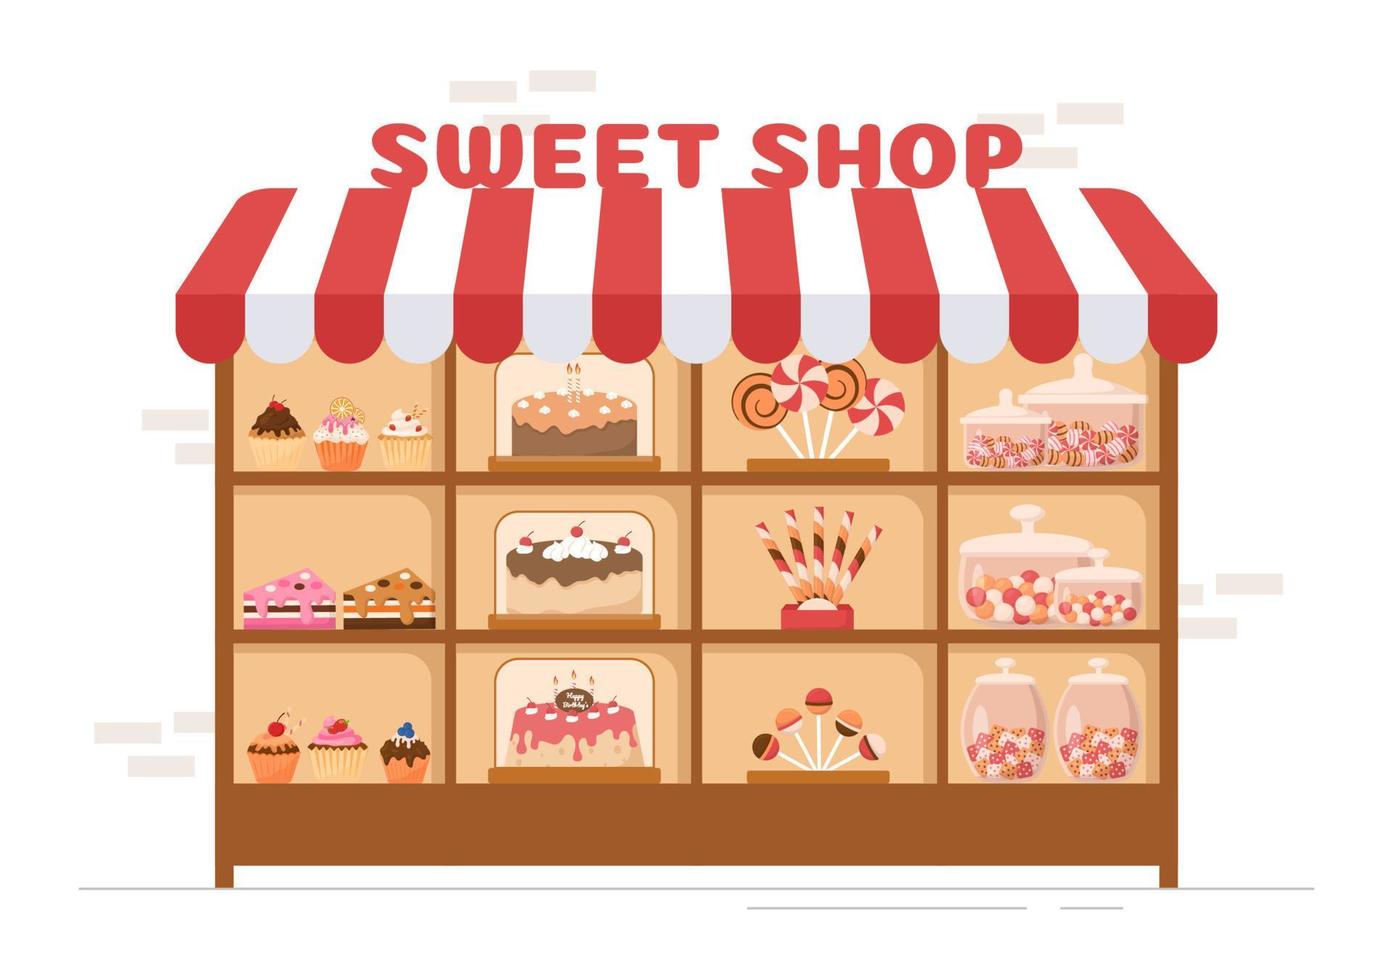 Sweet Shop Selling Various Bakery Products, Cupcake, Cake, Pastry or Candy on Flat Cartoon style Hand Drawn Templates Illustration vector